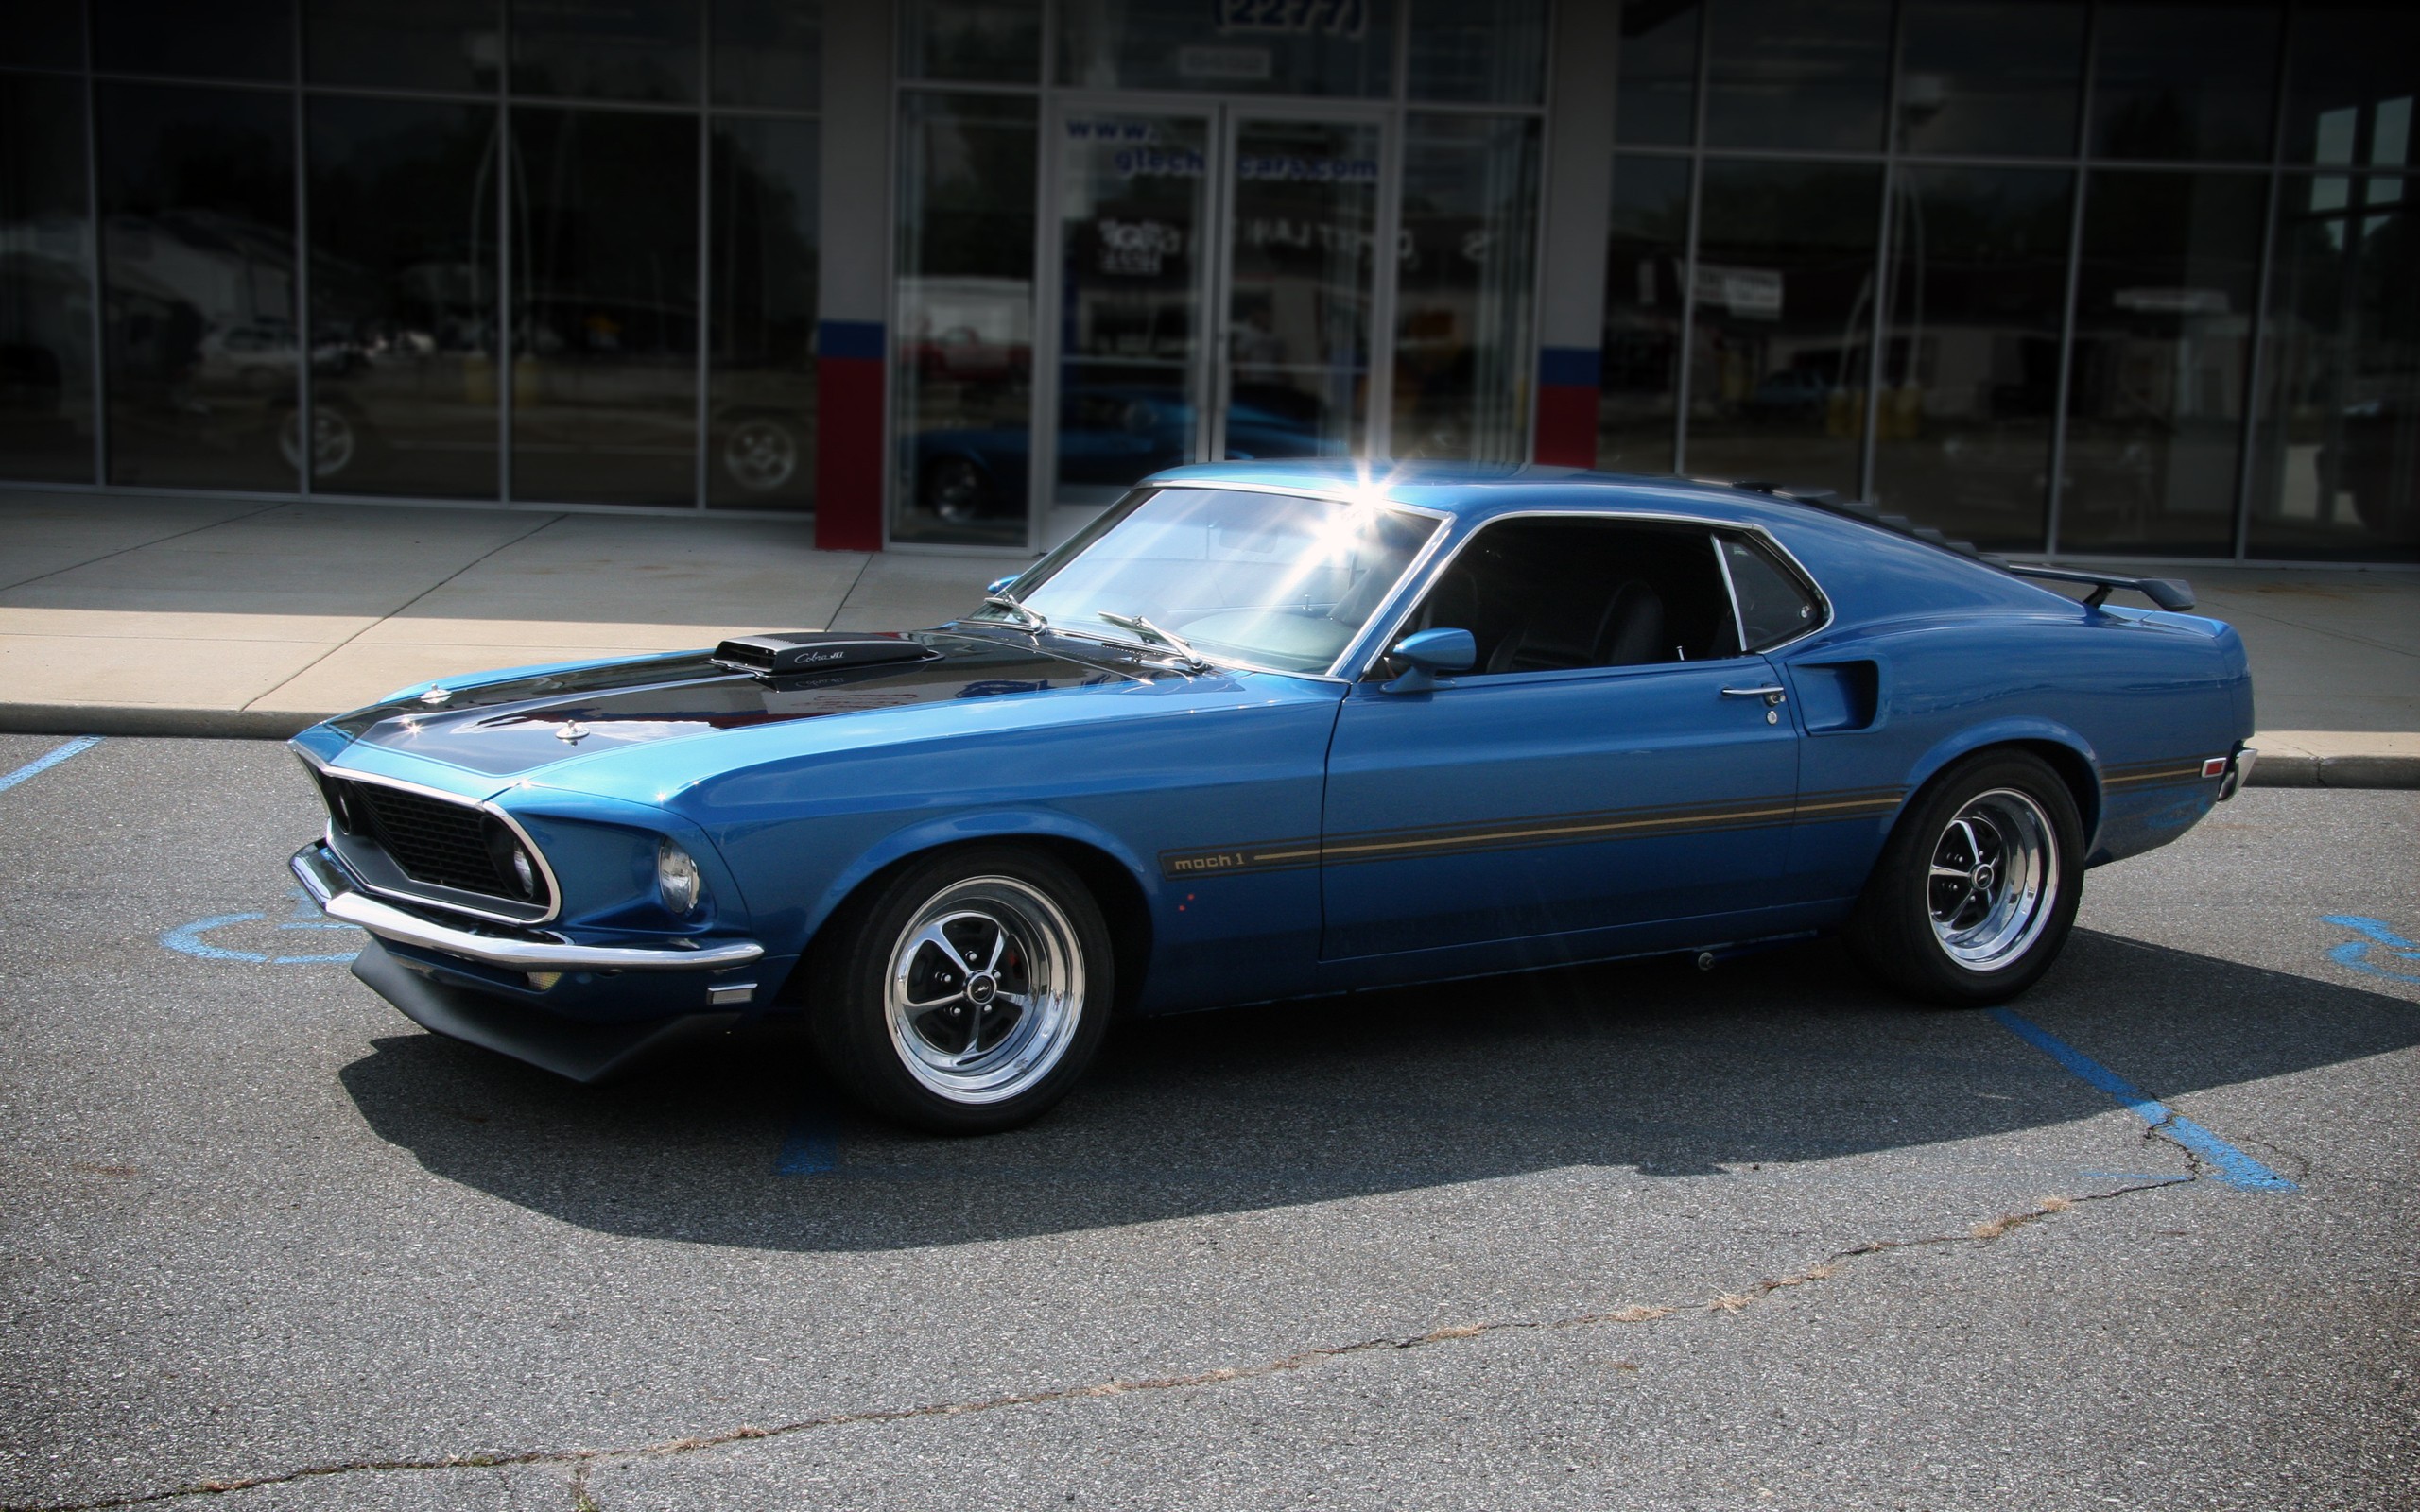 General 2560x1600 car Ford Ford Mustang Ford Mustang Mach 1 blue cars vehicle muscle cars American cars